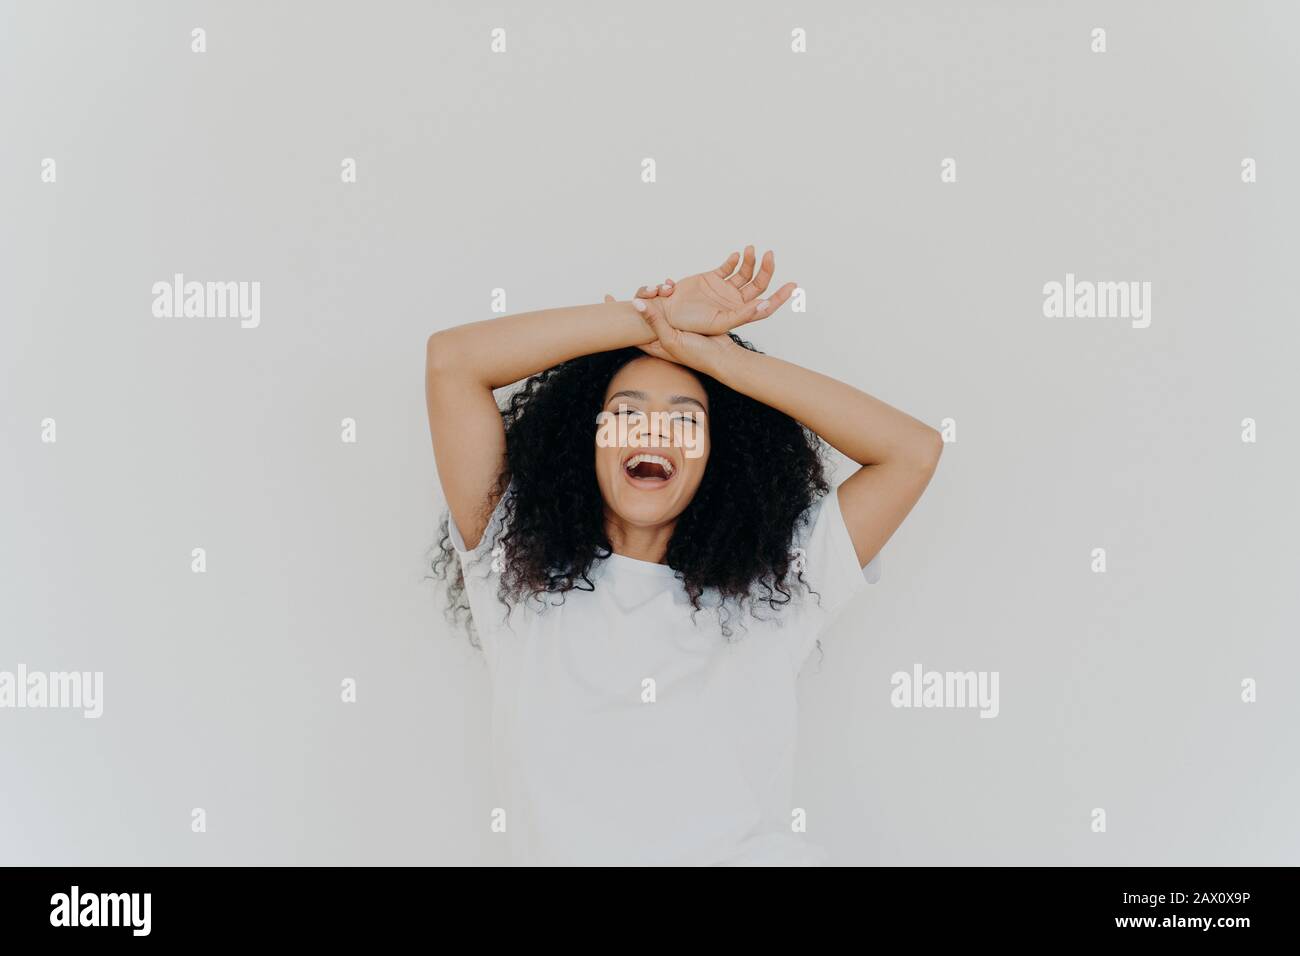 Overjoyed curly haired young lady keeps both hands on forehead, opens mouth and laughs happily, feels energetic, dressed in casual wear, poses against Stock Photo